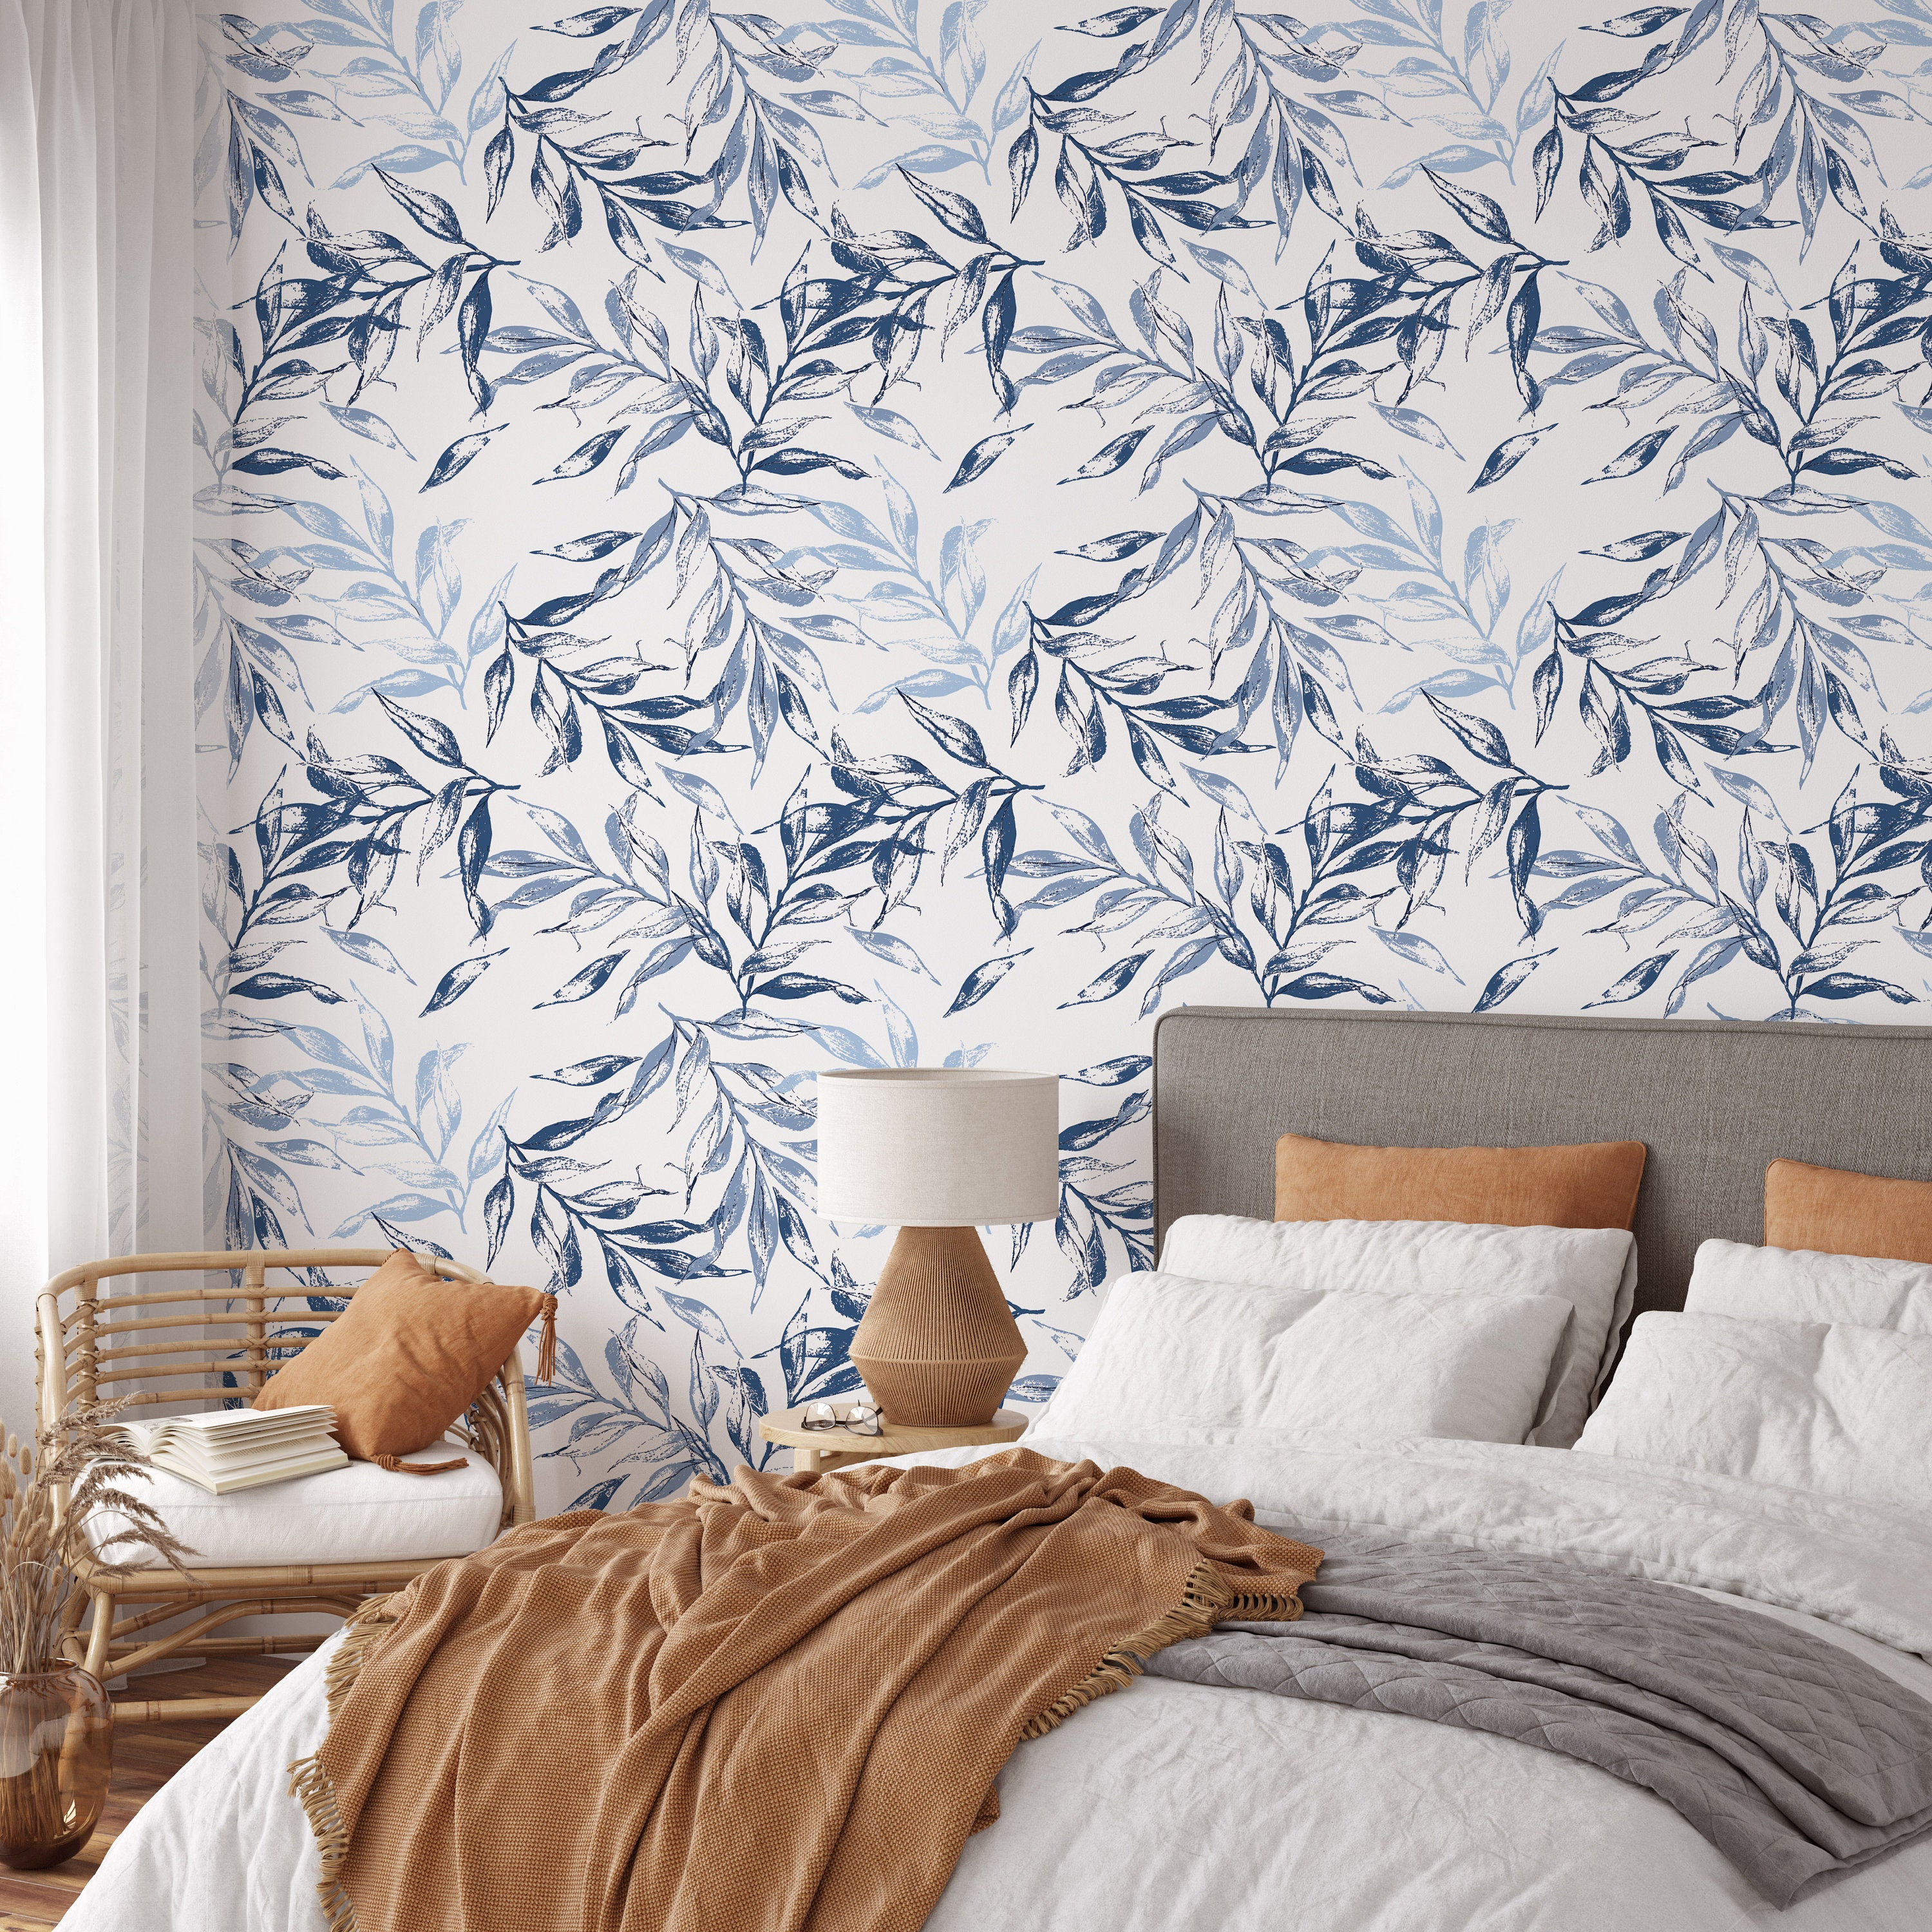 Removable Wallpaper 9ft x 2ft  Blue White India  Ubuy